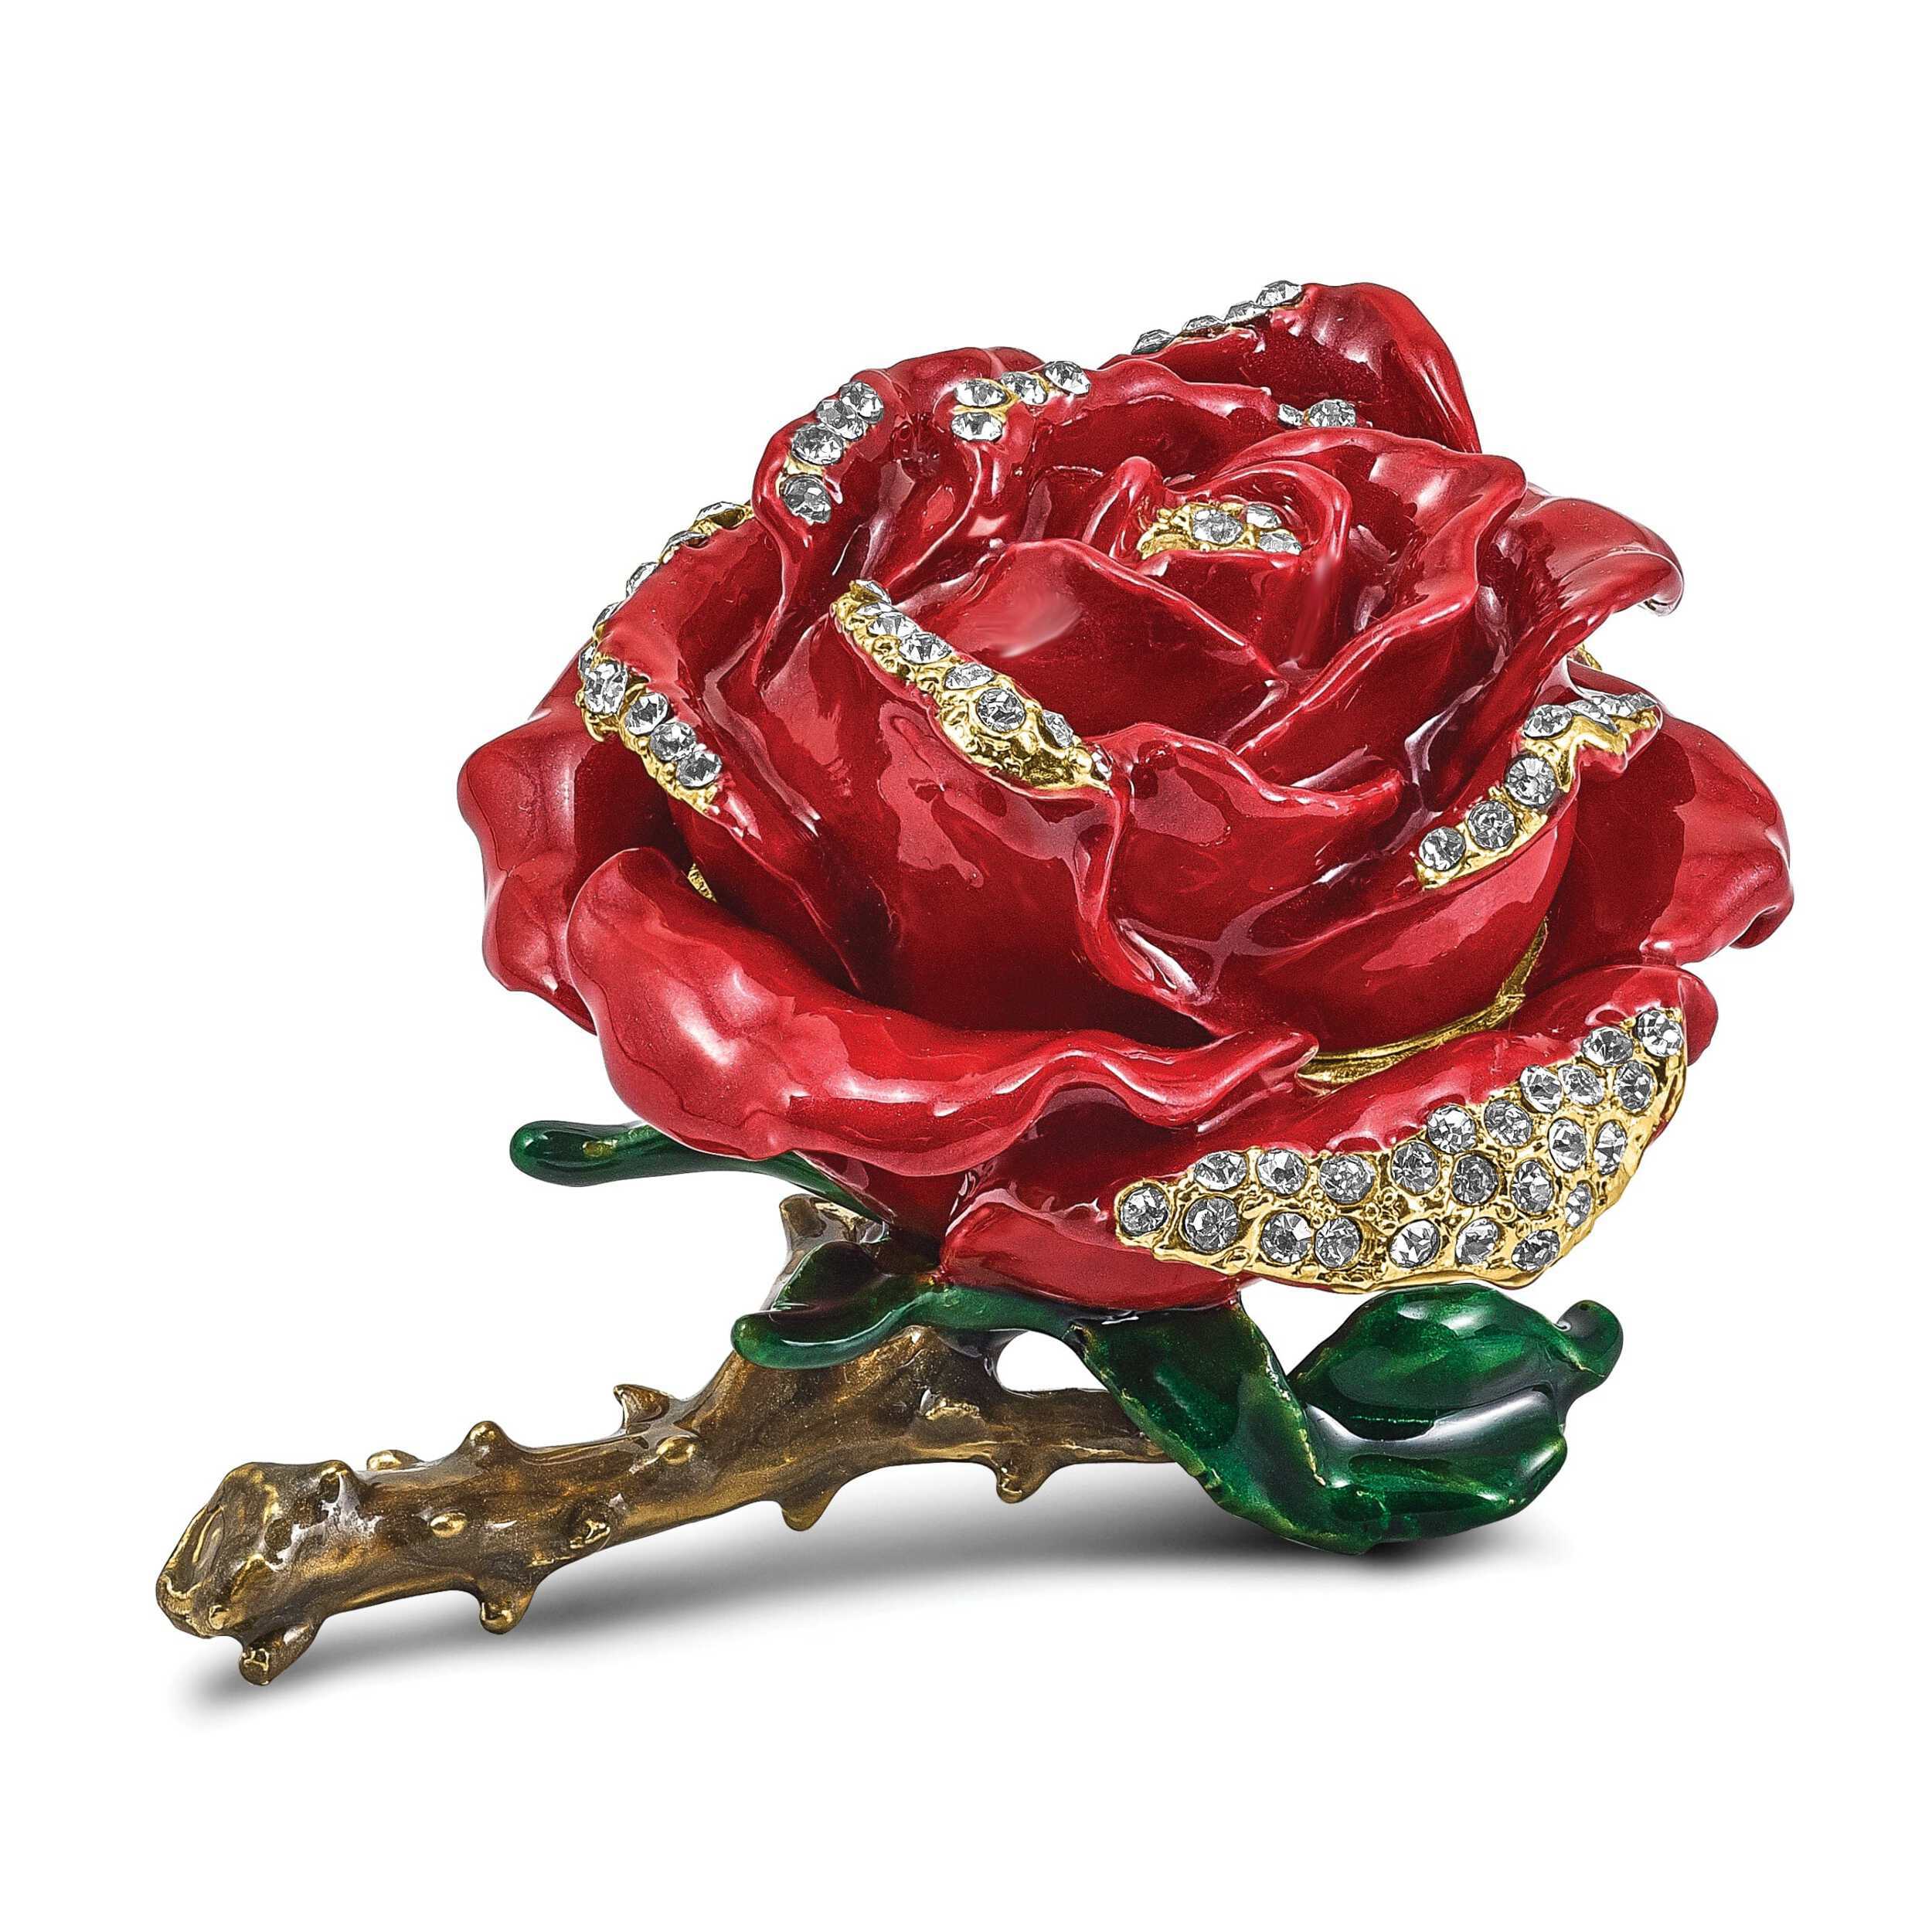 Bejeweled Pewter Multi Color Finish ROSA Red Rose Ring Pad Trinket Box - image 1 of 6